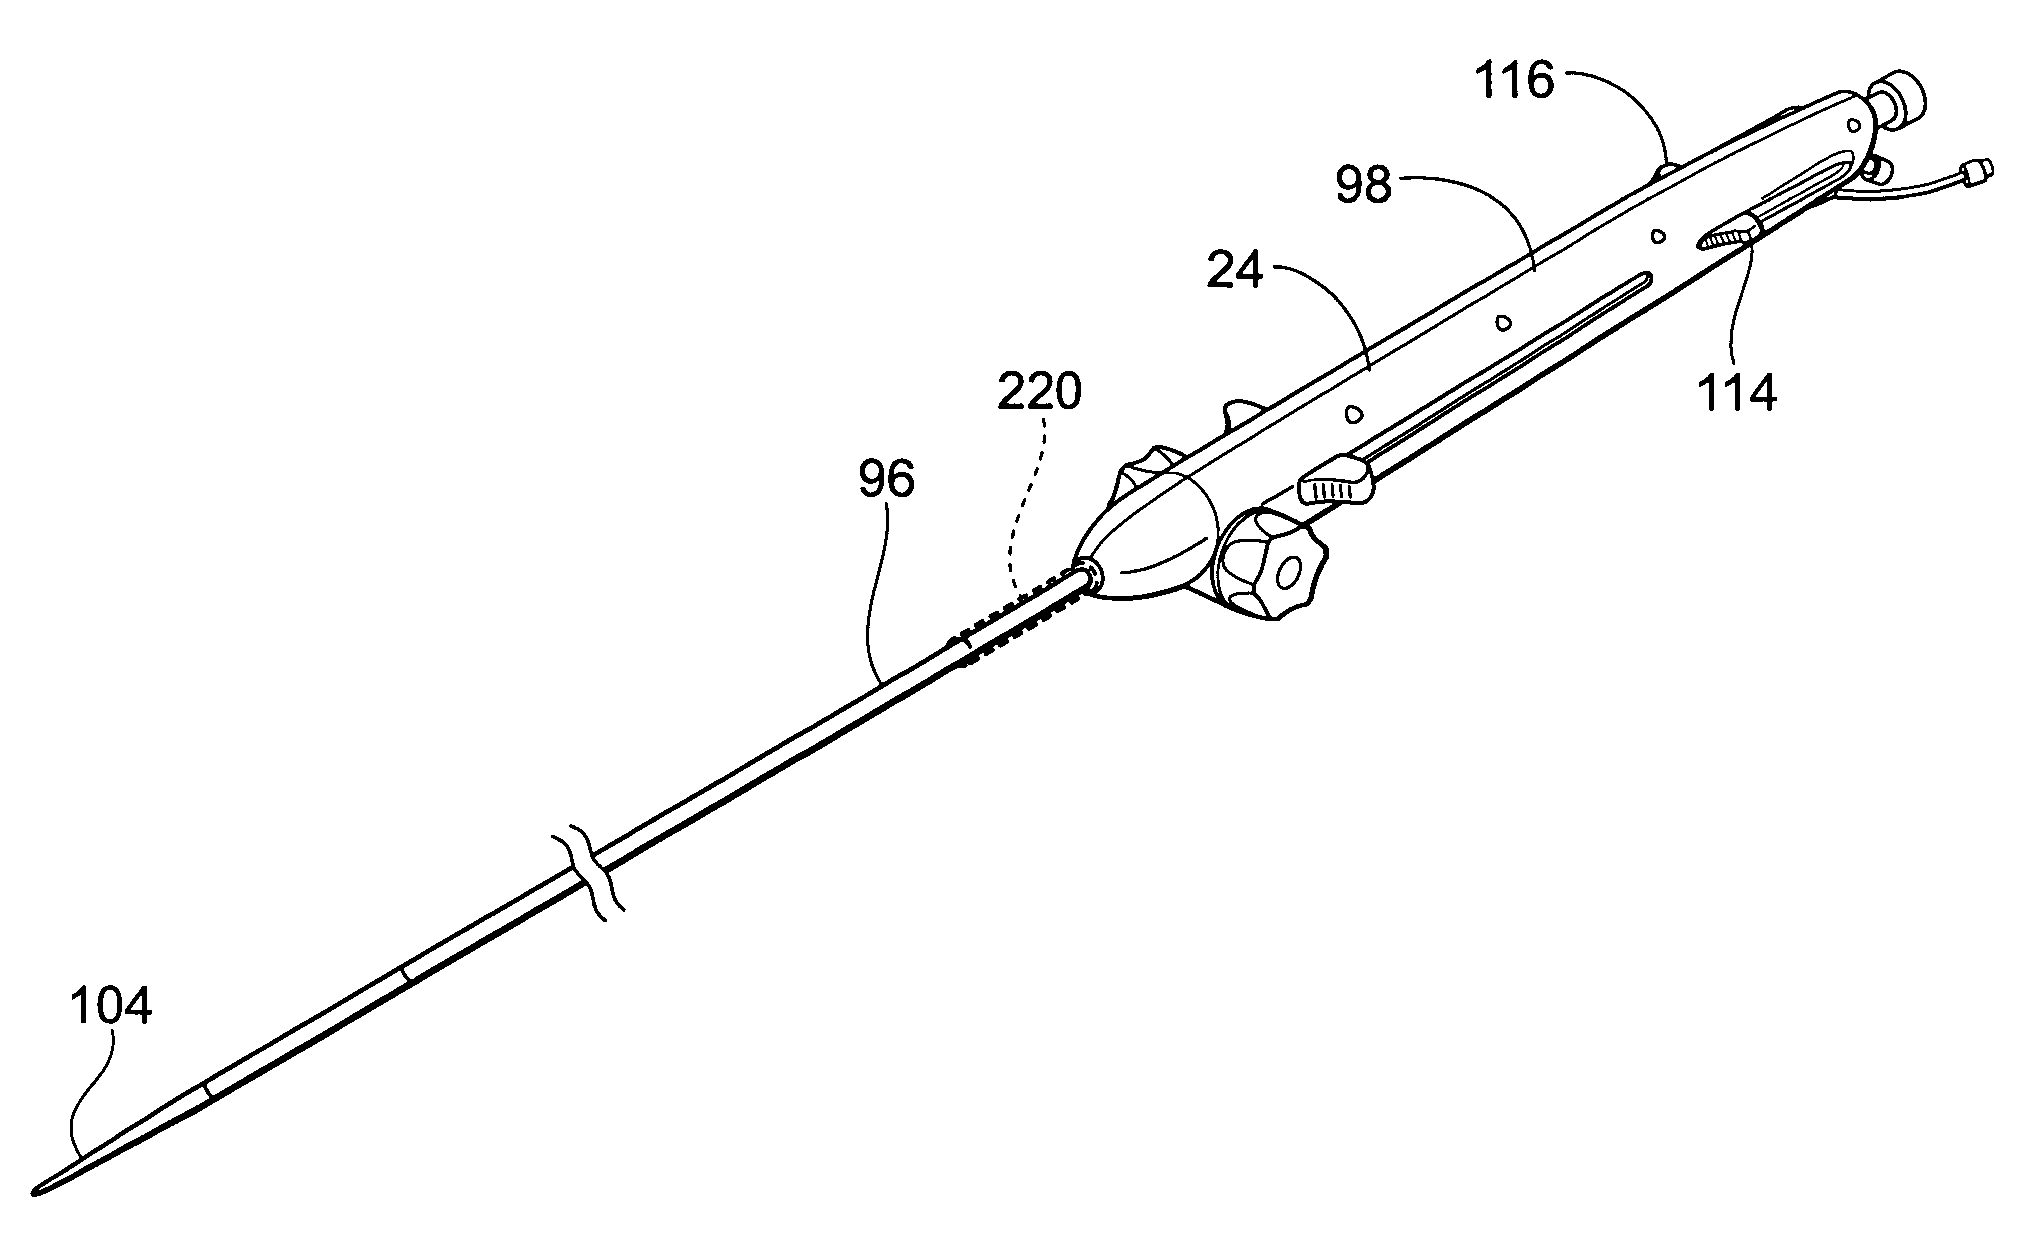 Devices, systems, and methods for endovascular staple and/or prosthesis delivery and implantation